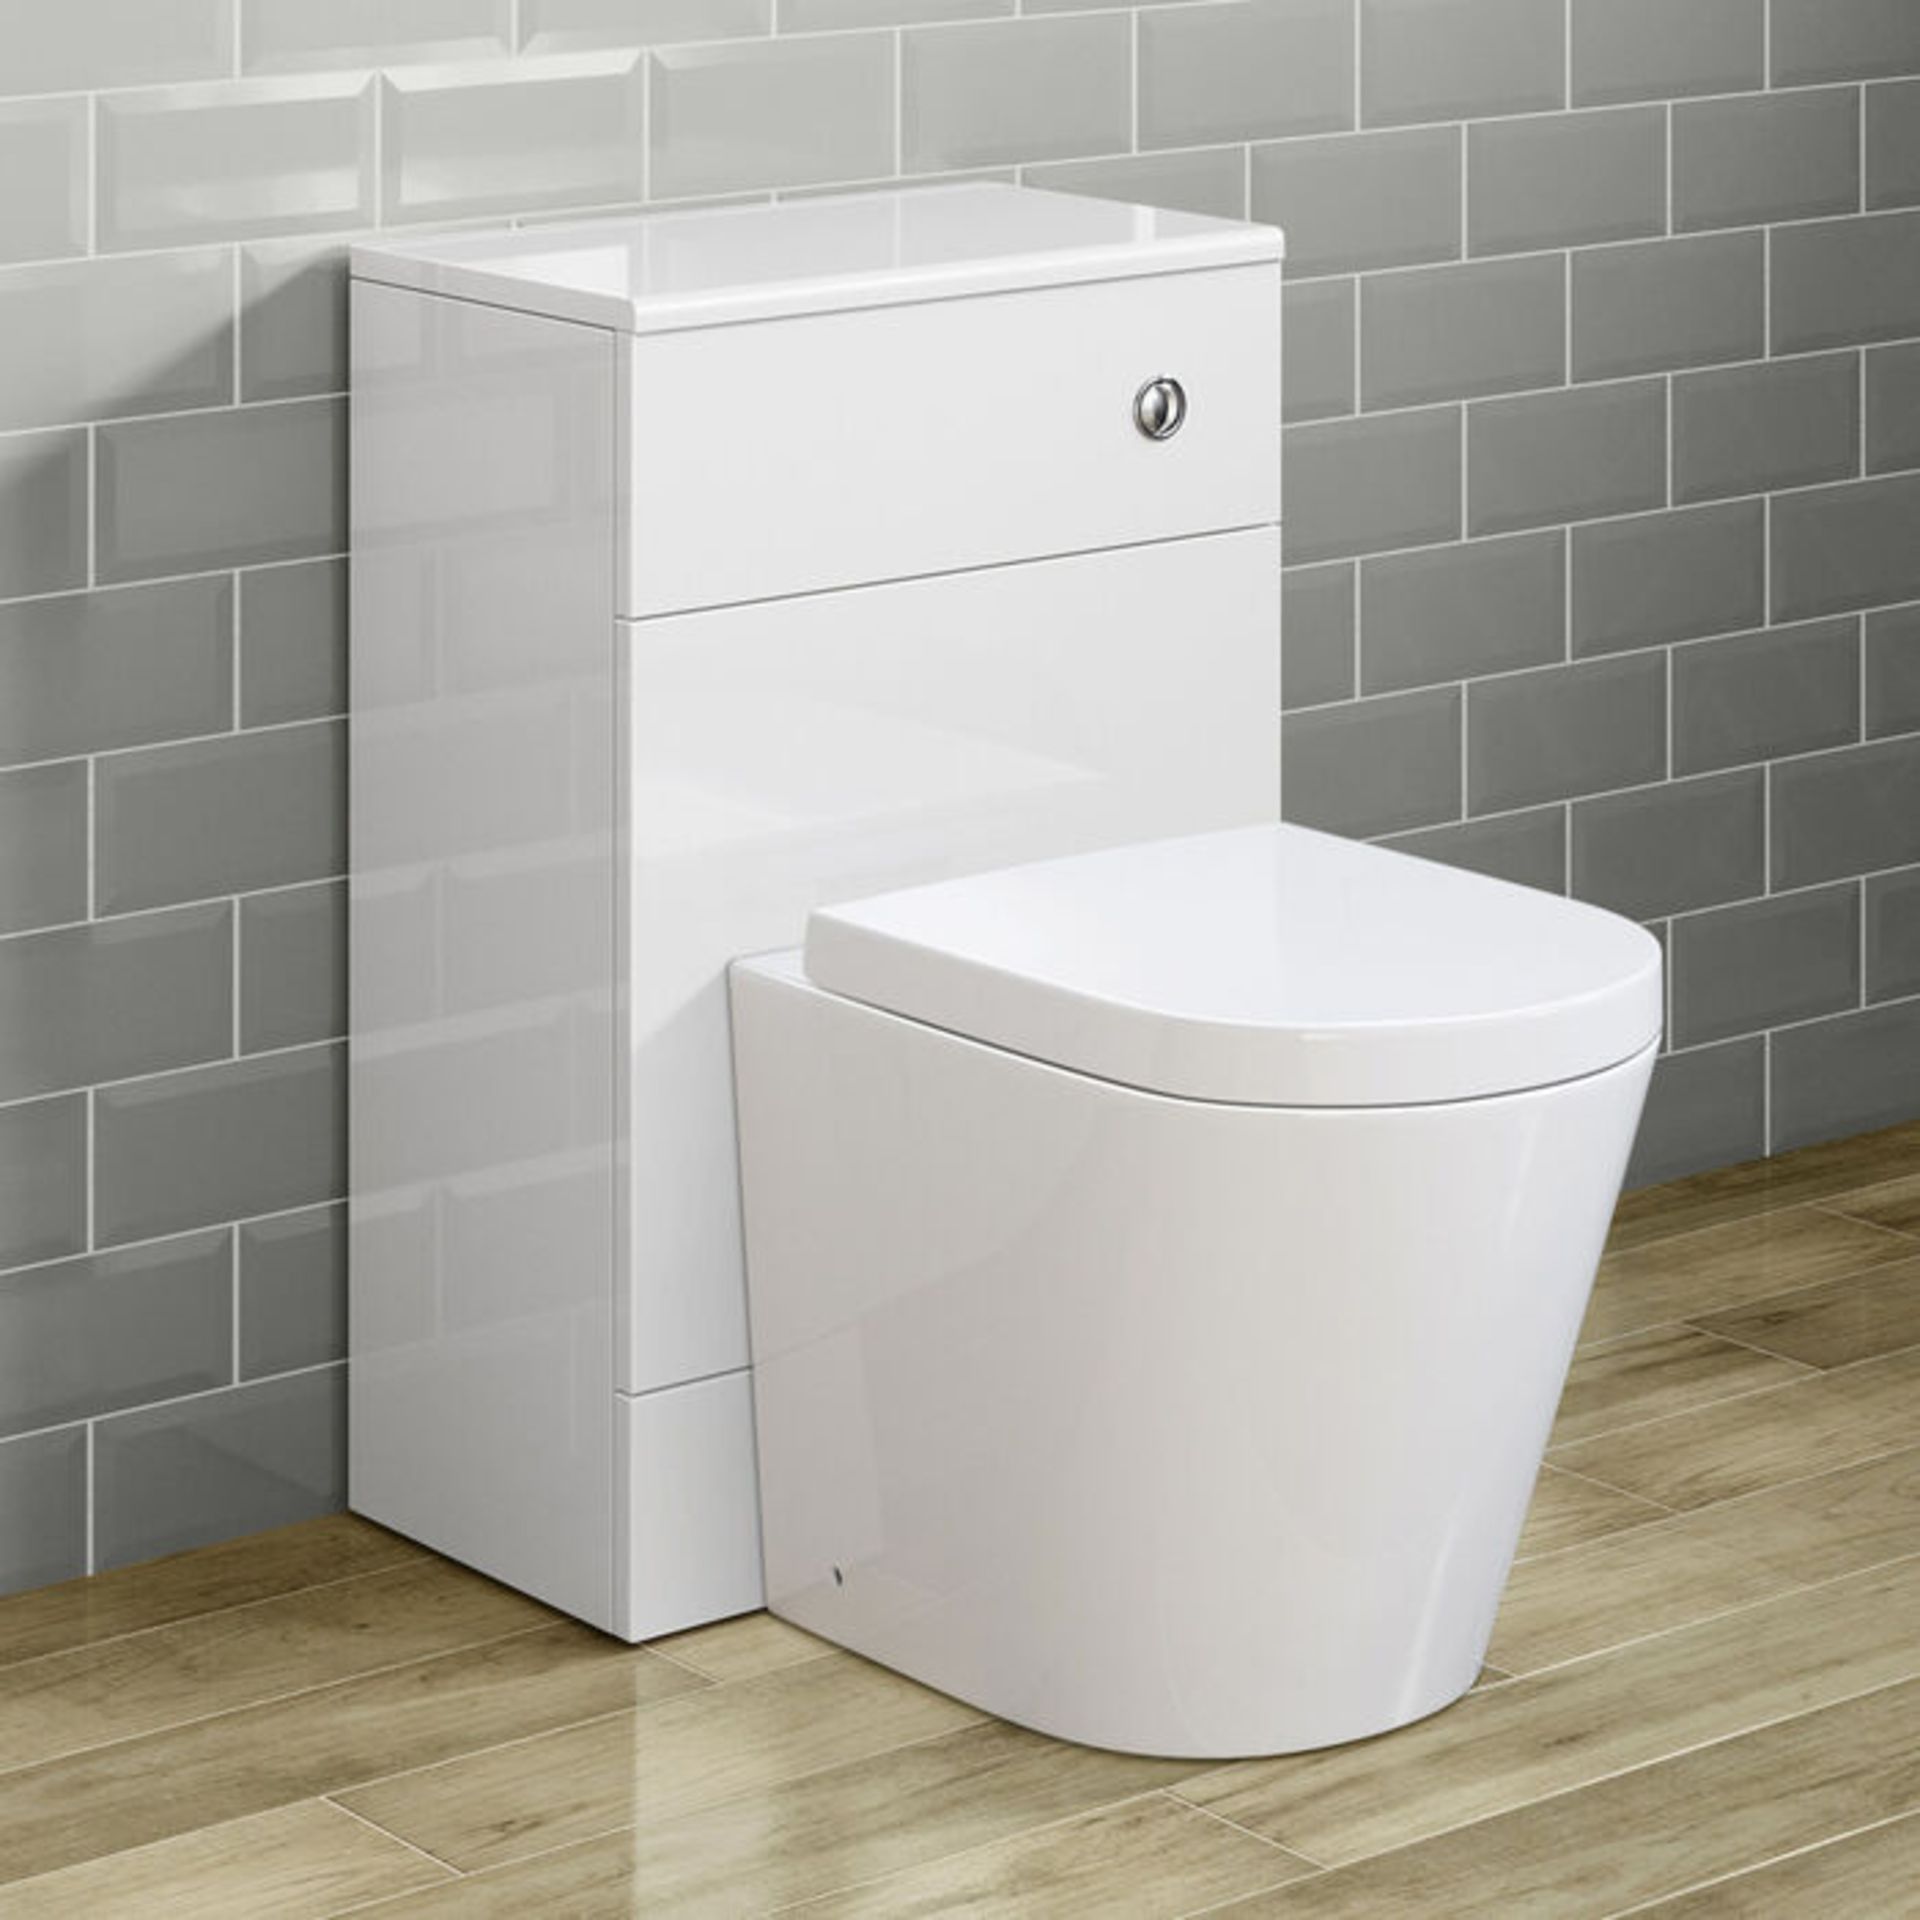 NEW (TT144) 500mm Harper Gloss White Back To Wall Toilet Unit Our discreet unit cleverly houses...